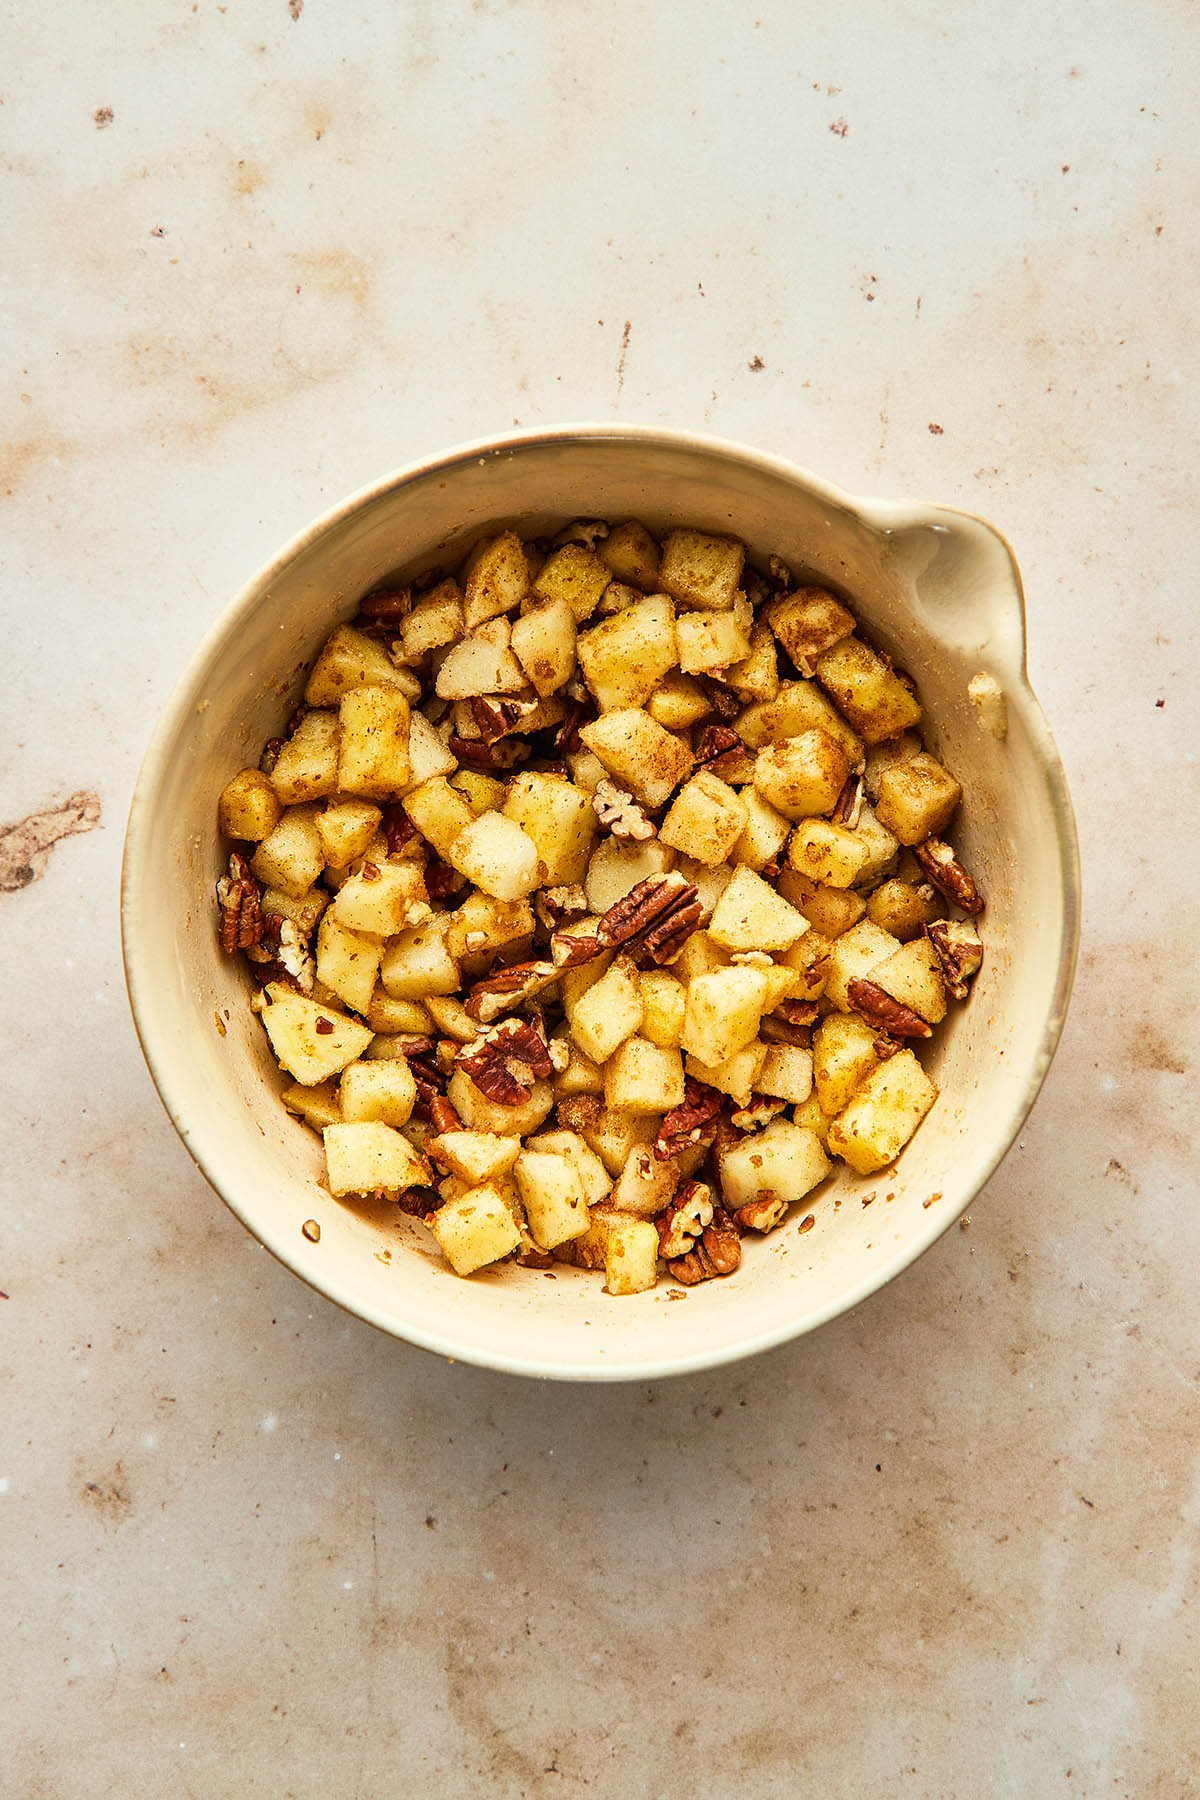 A bowl of diced apples stirred with pecans, cinnamon, and sugar.